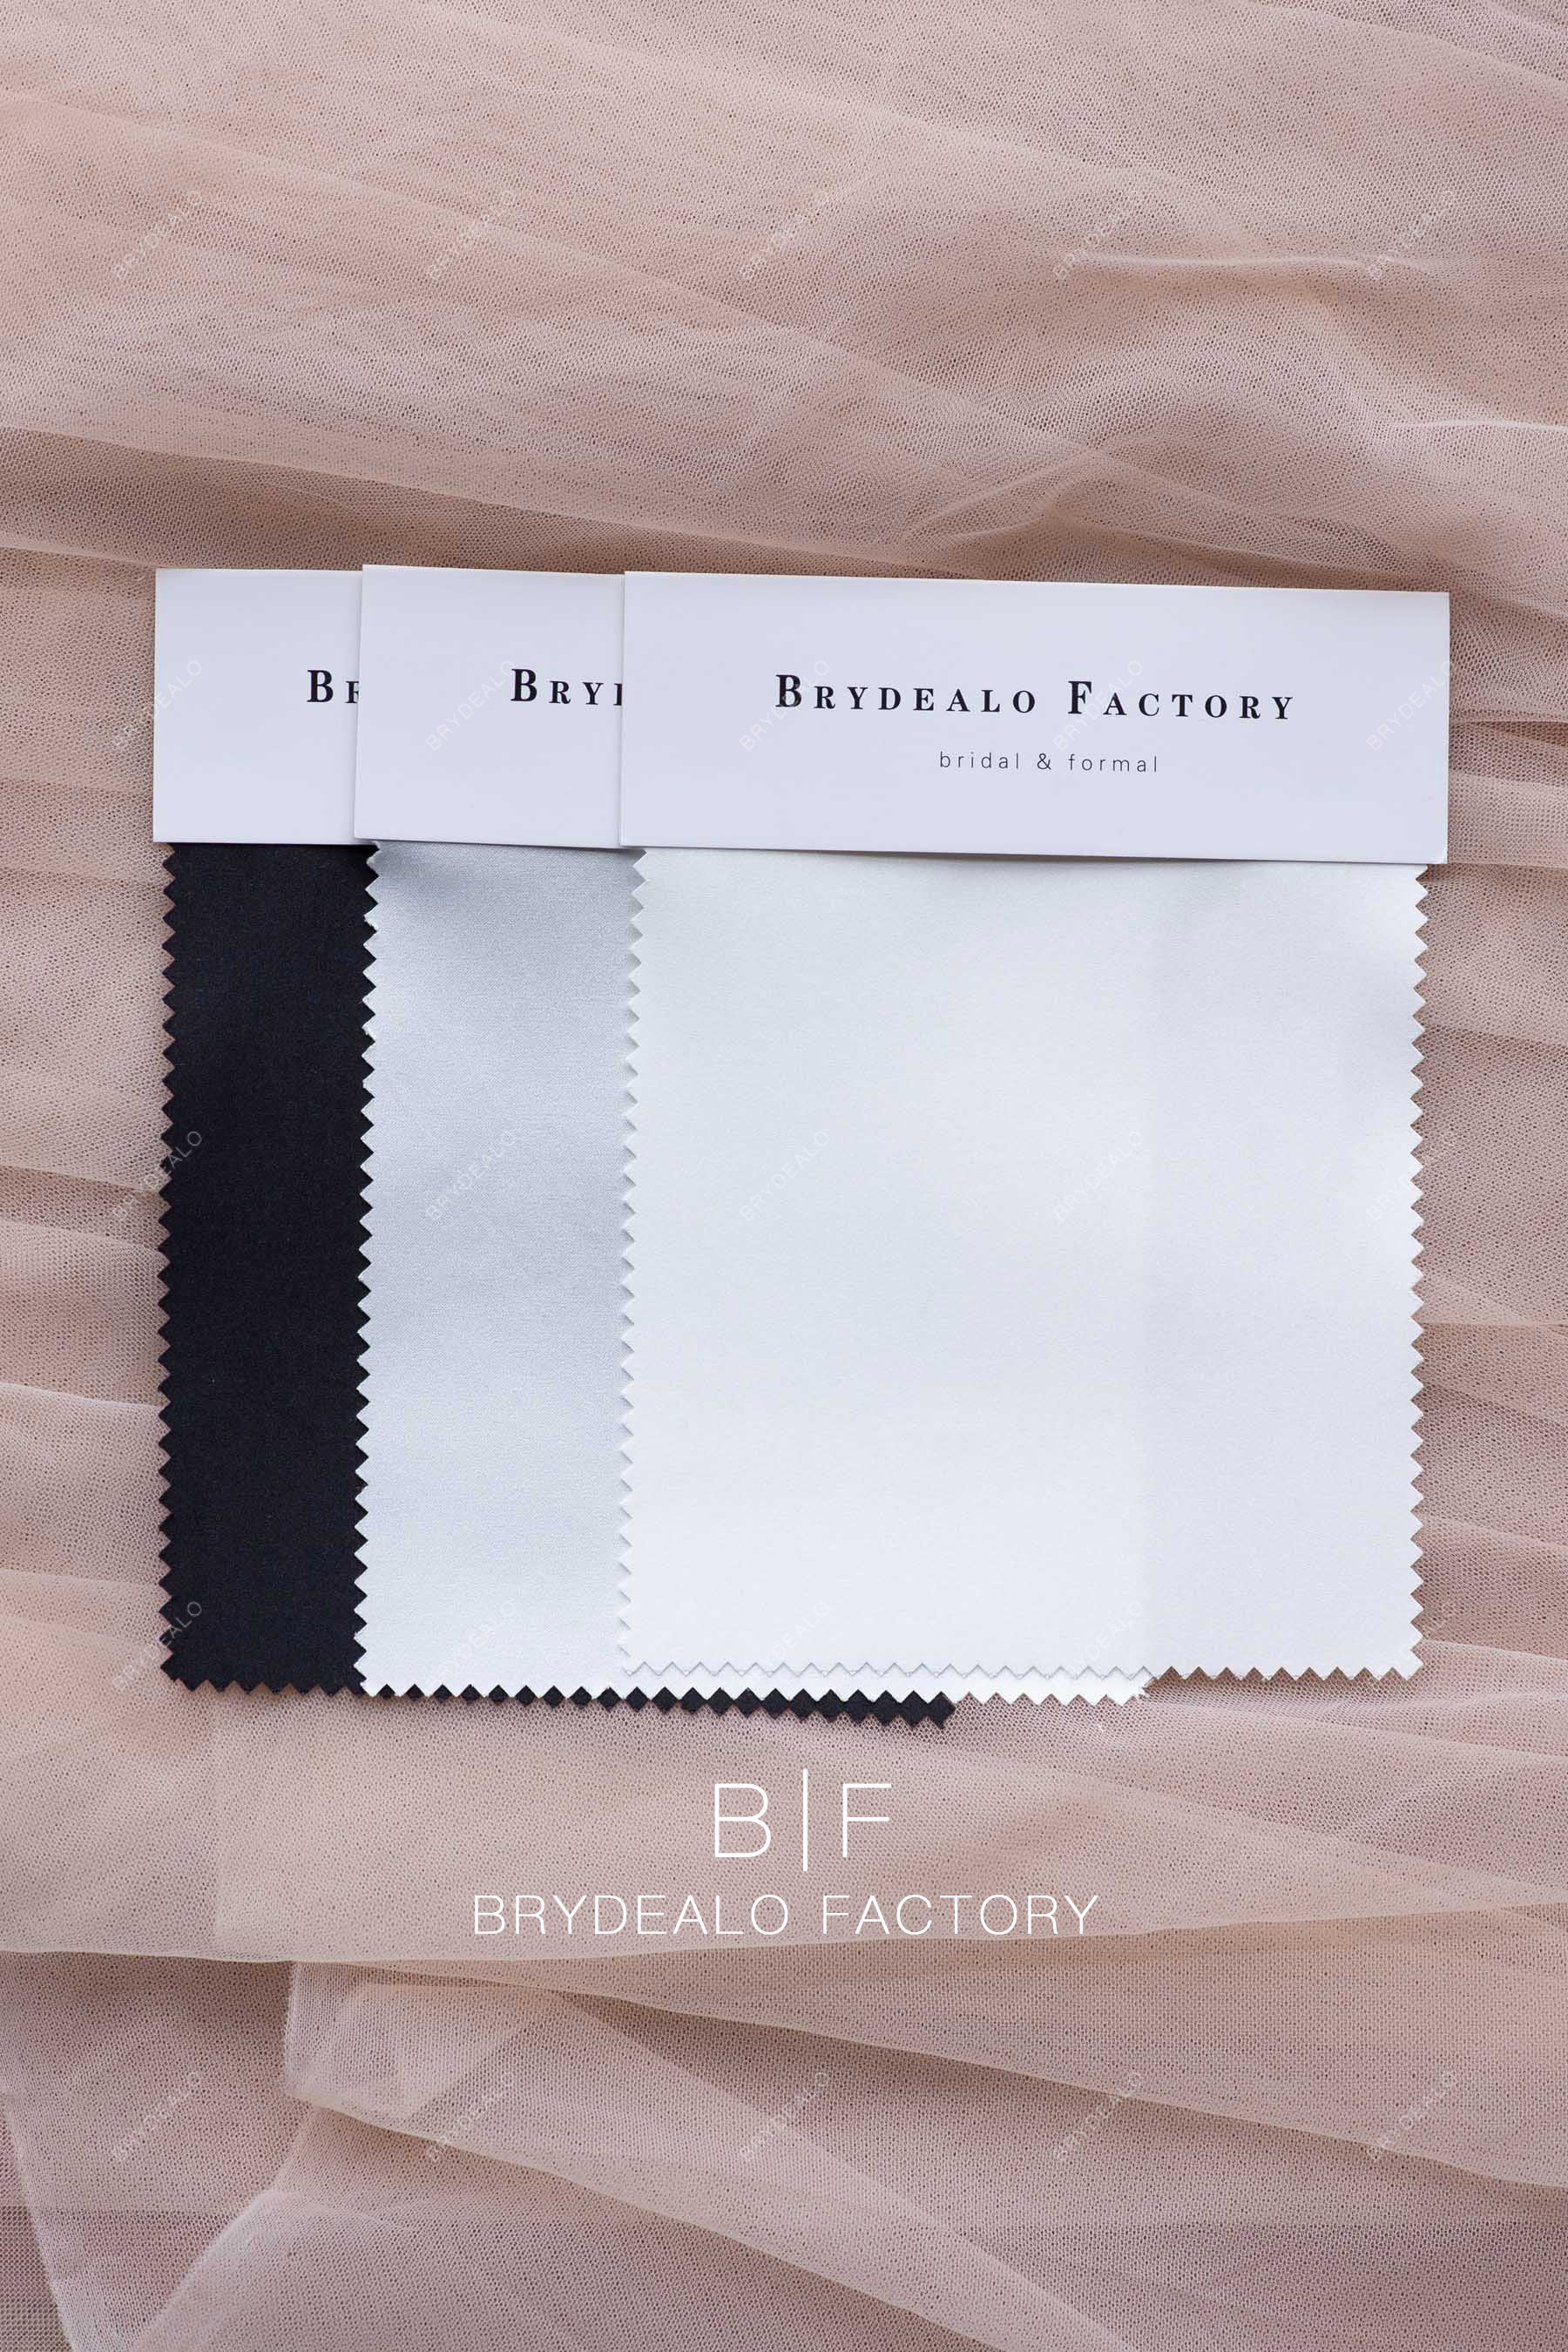 high end bridal satin fabric swatches